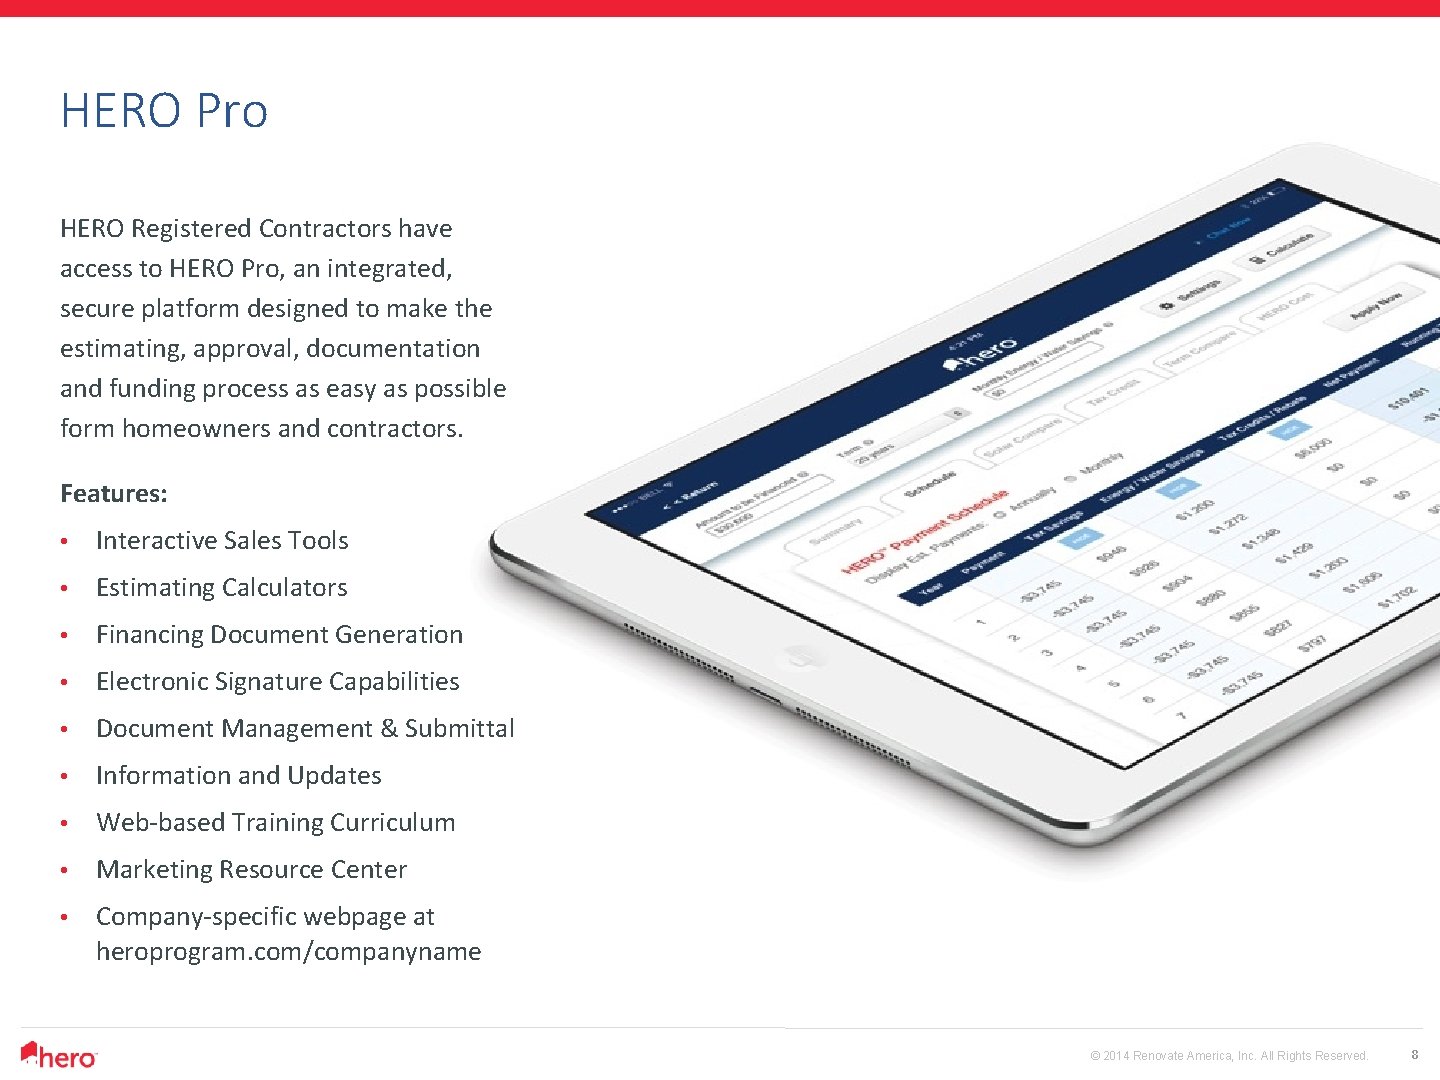 HERO Pro HERO Registered Contractors have access to HERO Pro, an integrated, secure platform